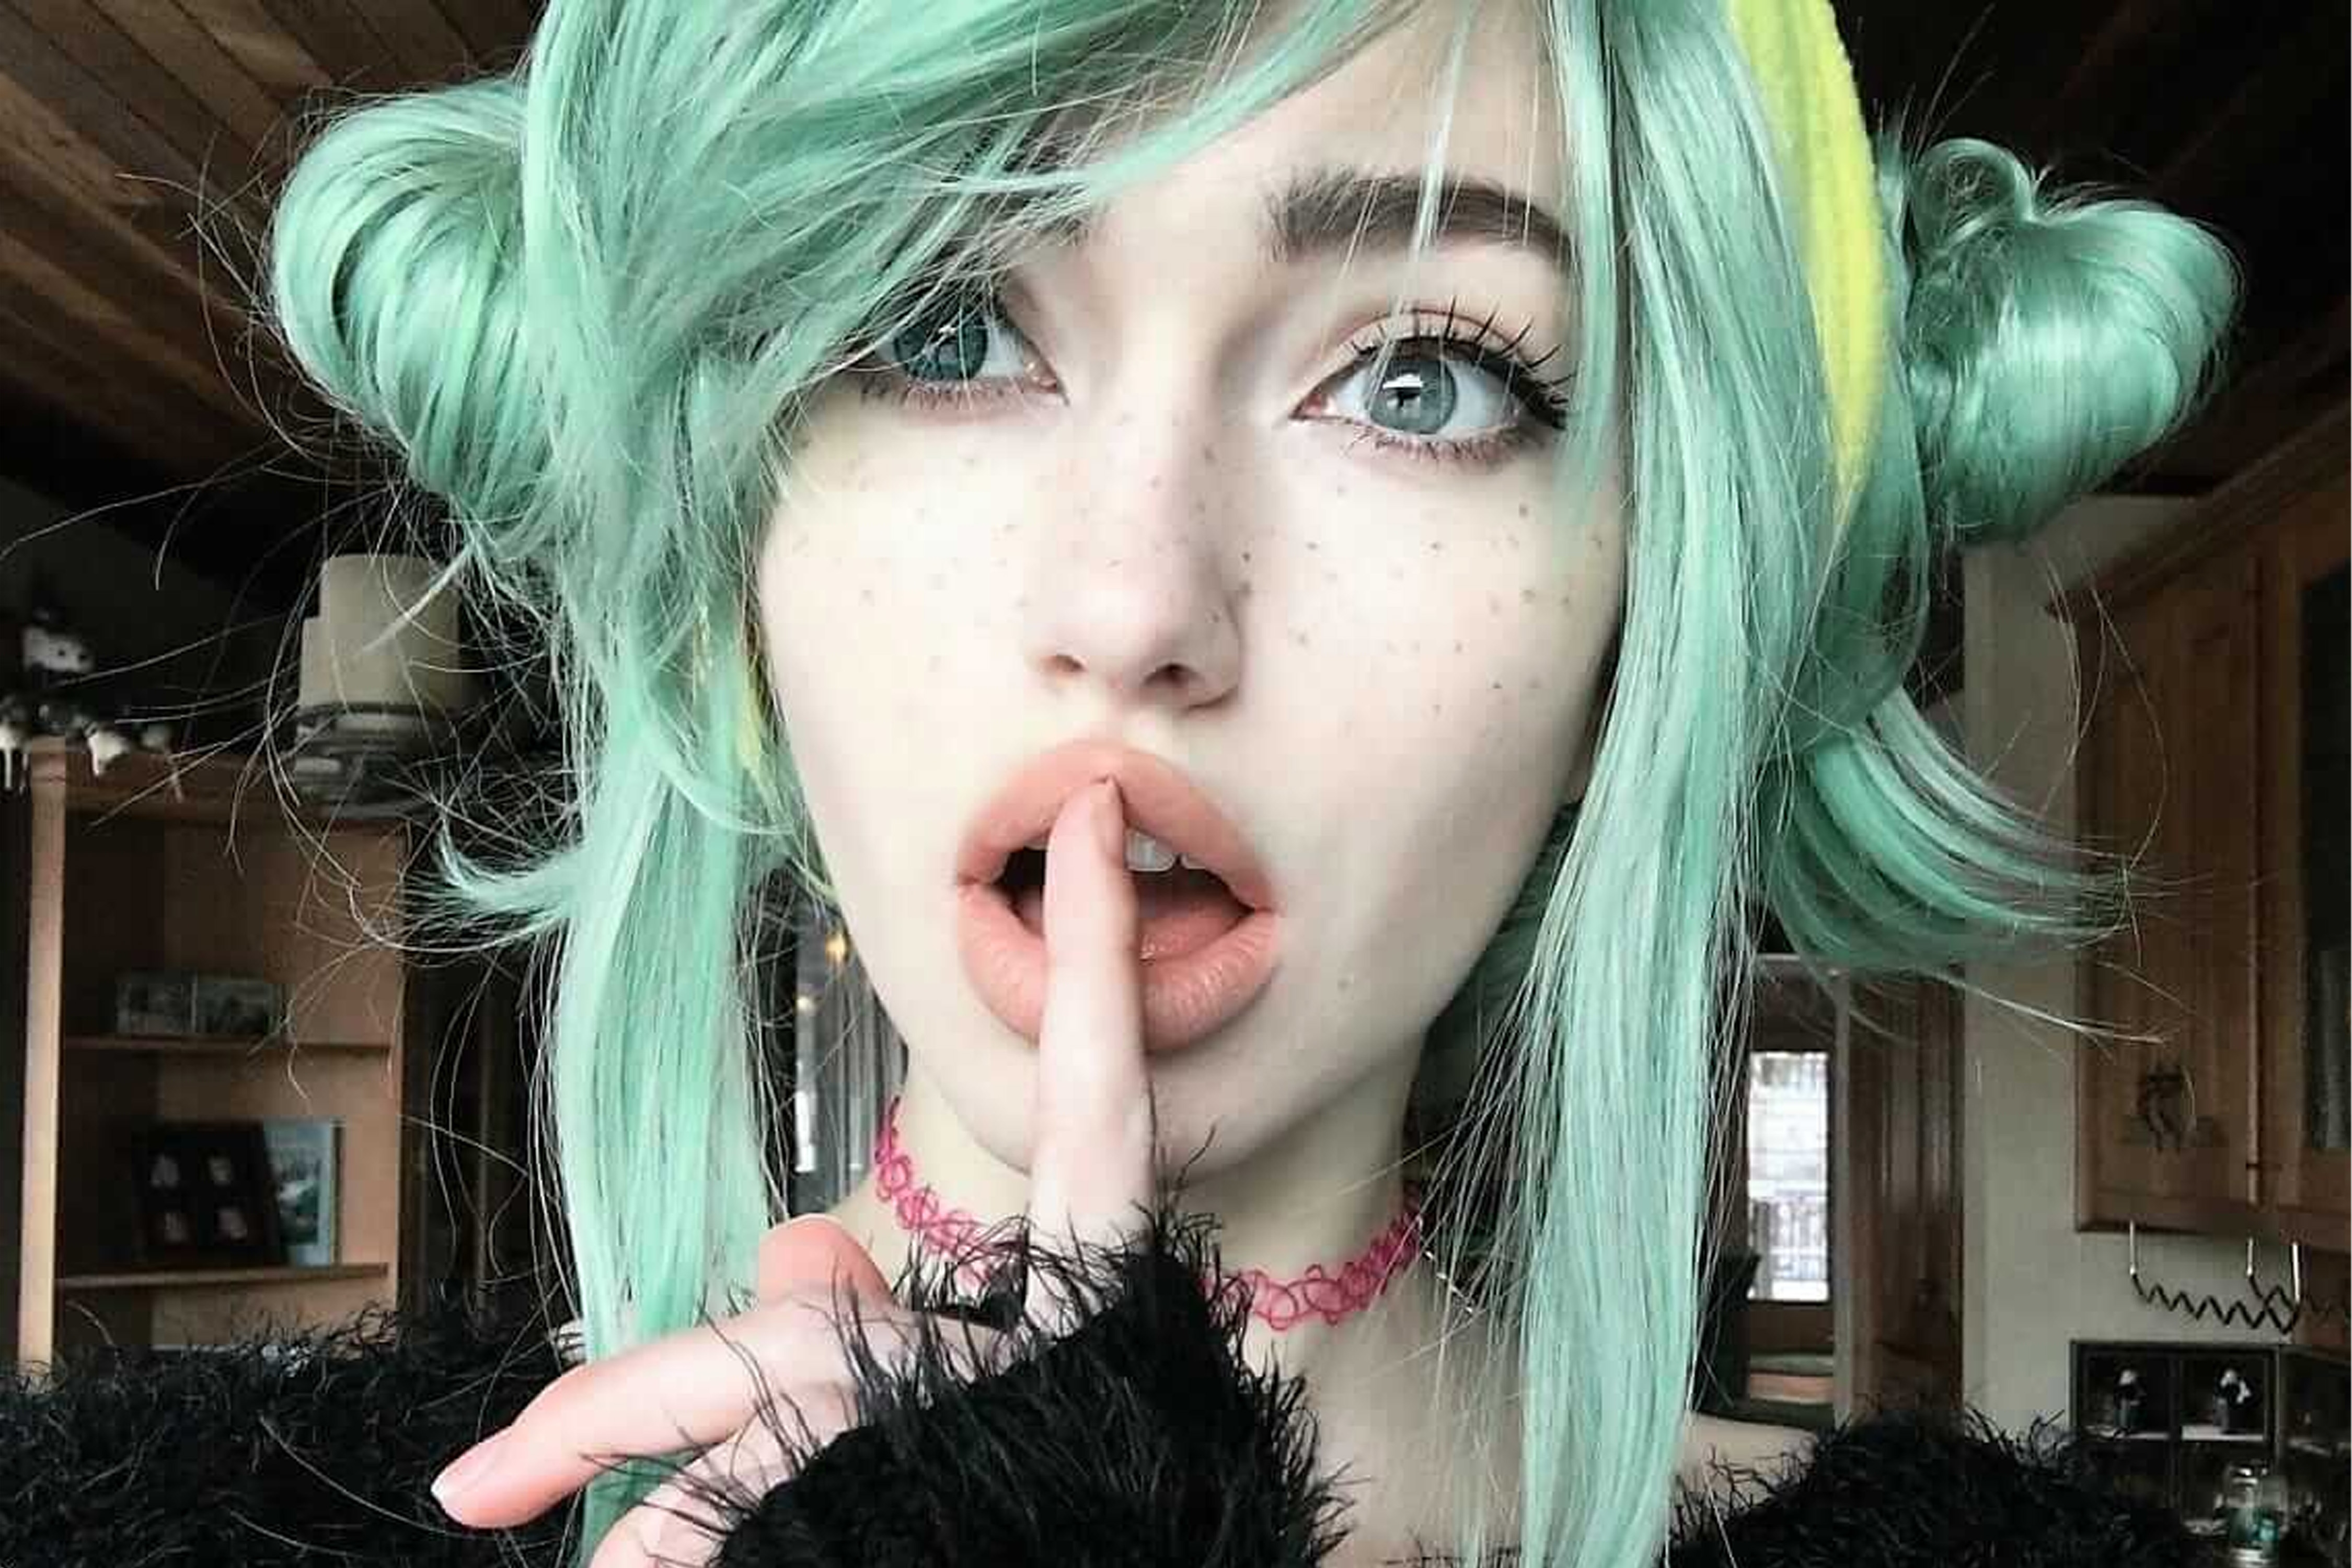 blonde hair turned green after coloring